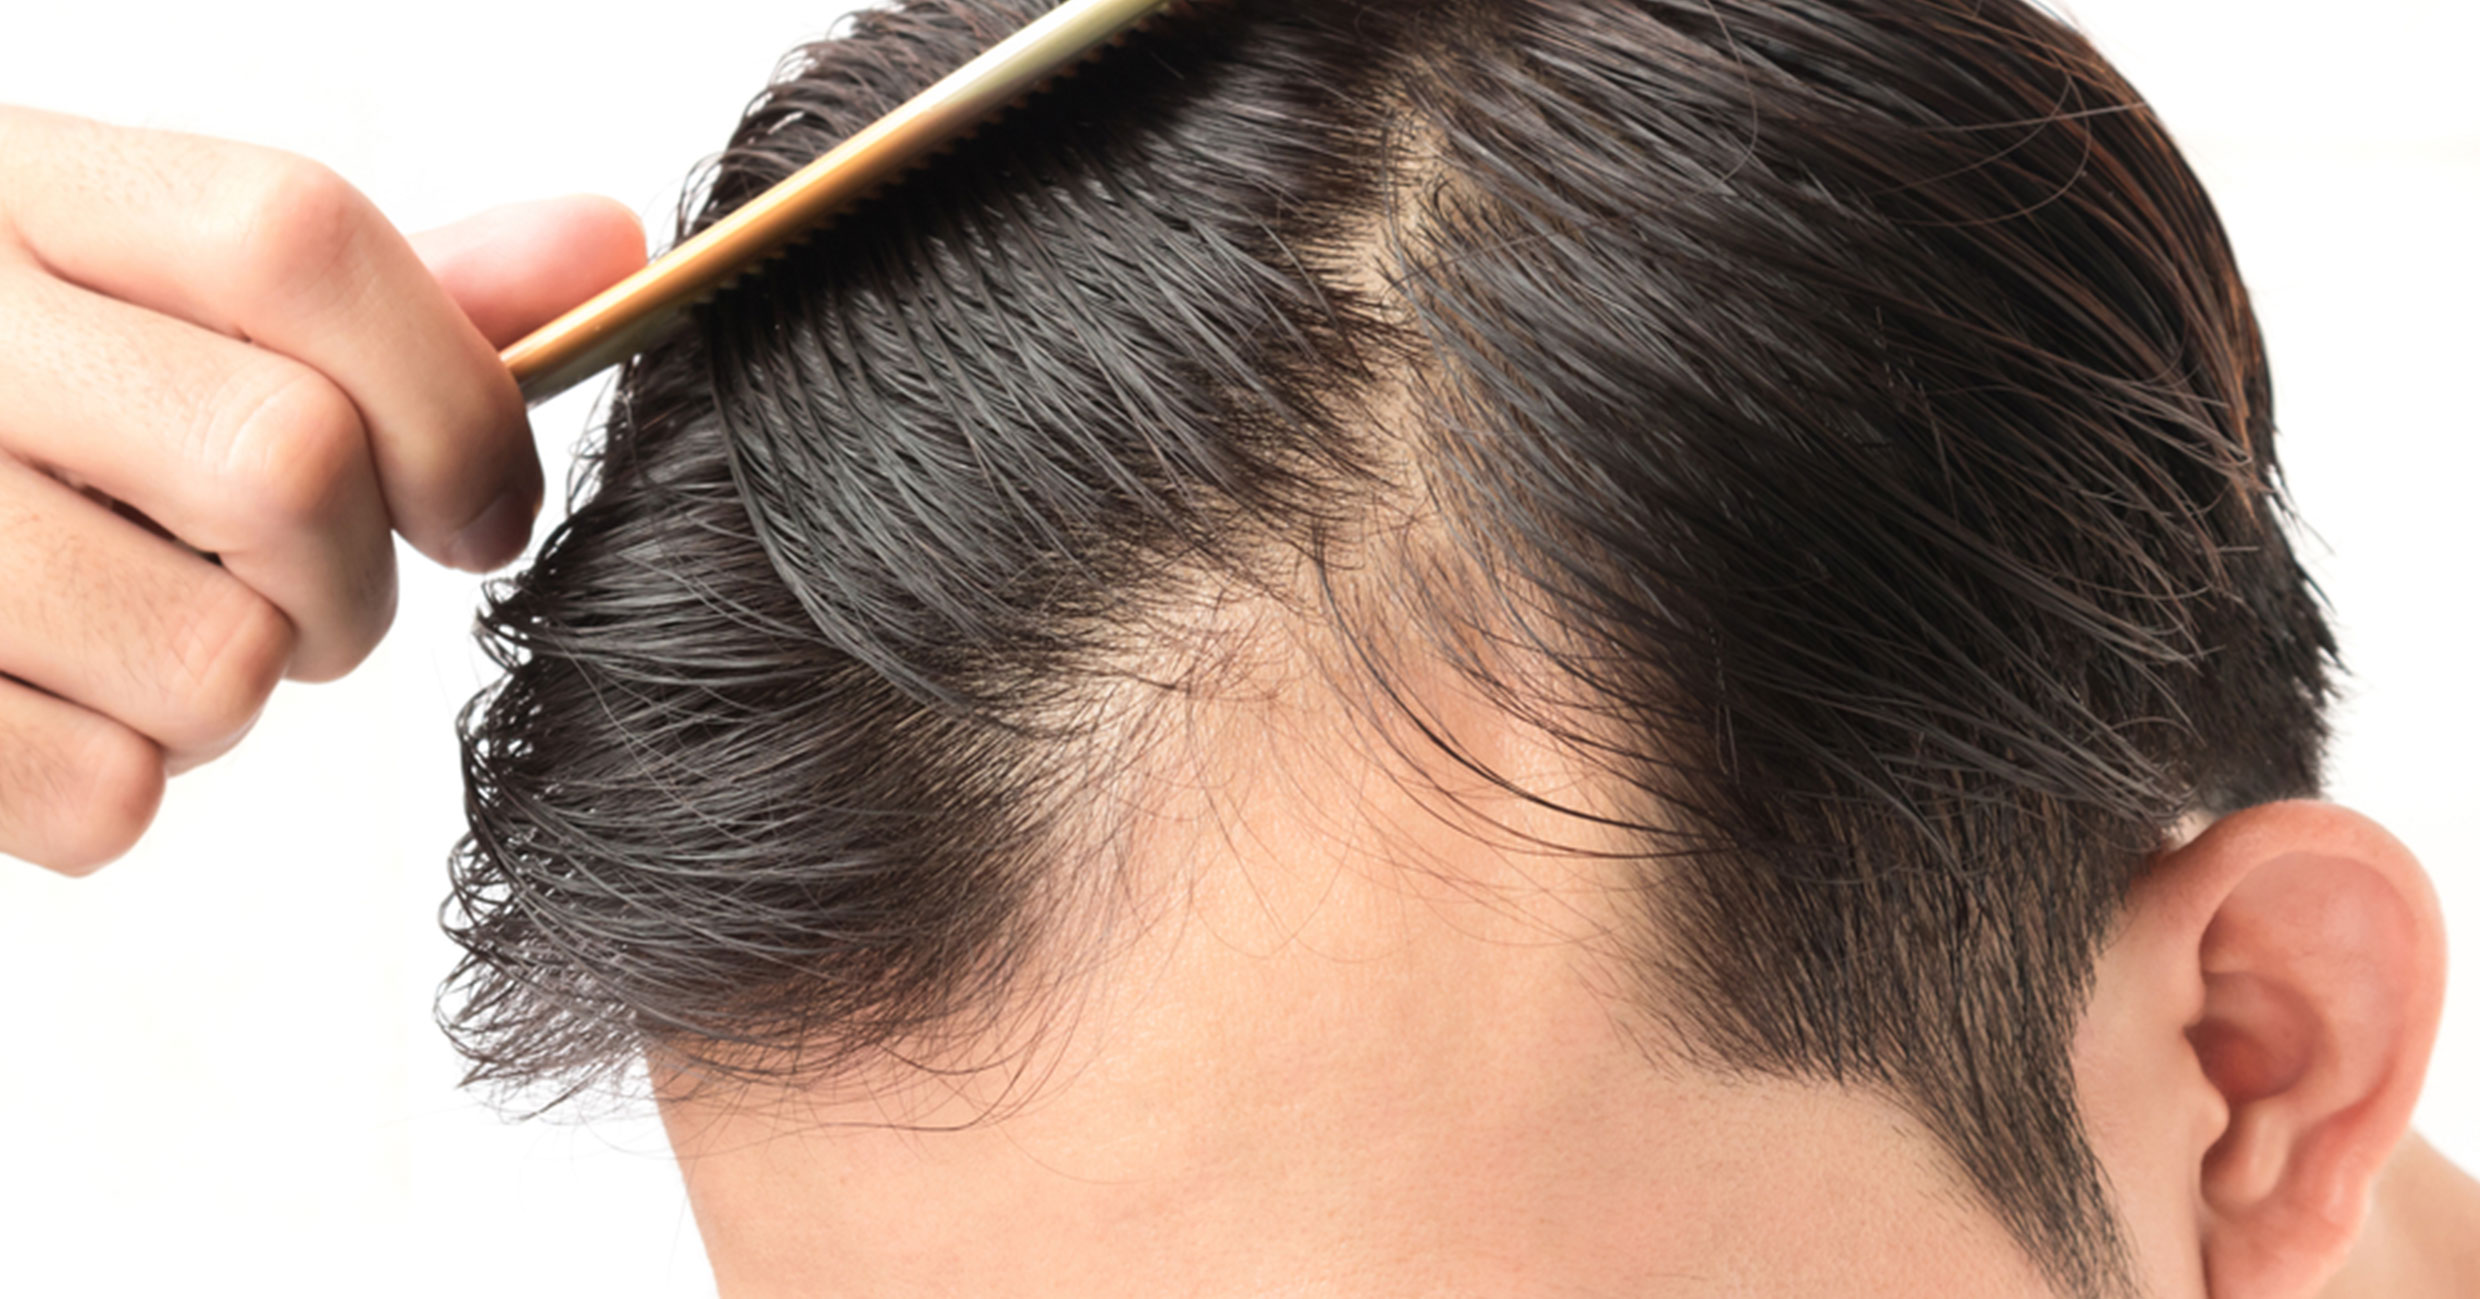 What Signs Mean I Should Schedule a Hair Loss Consultation? | RHRLI